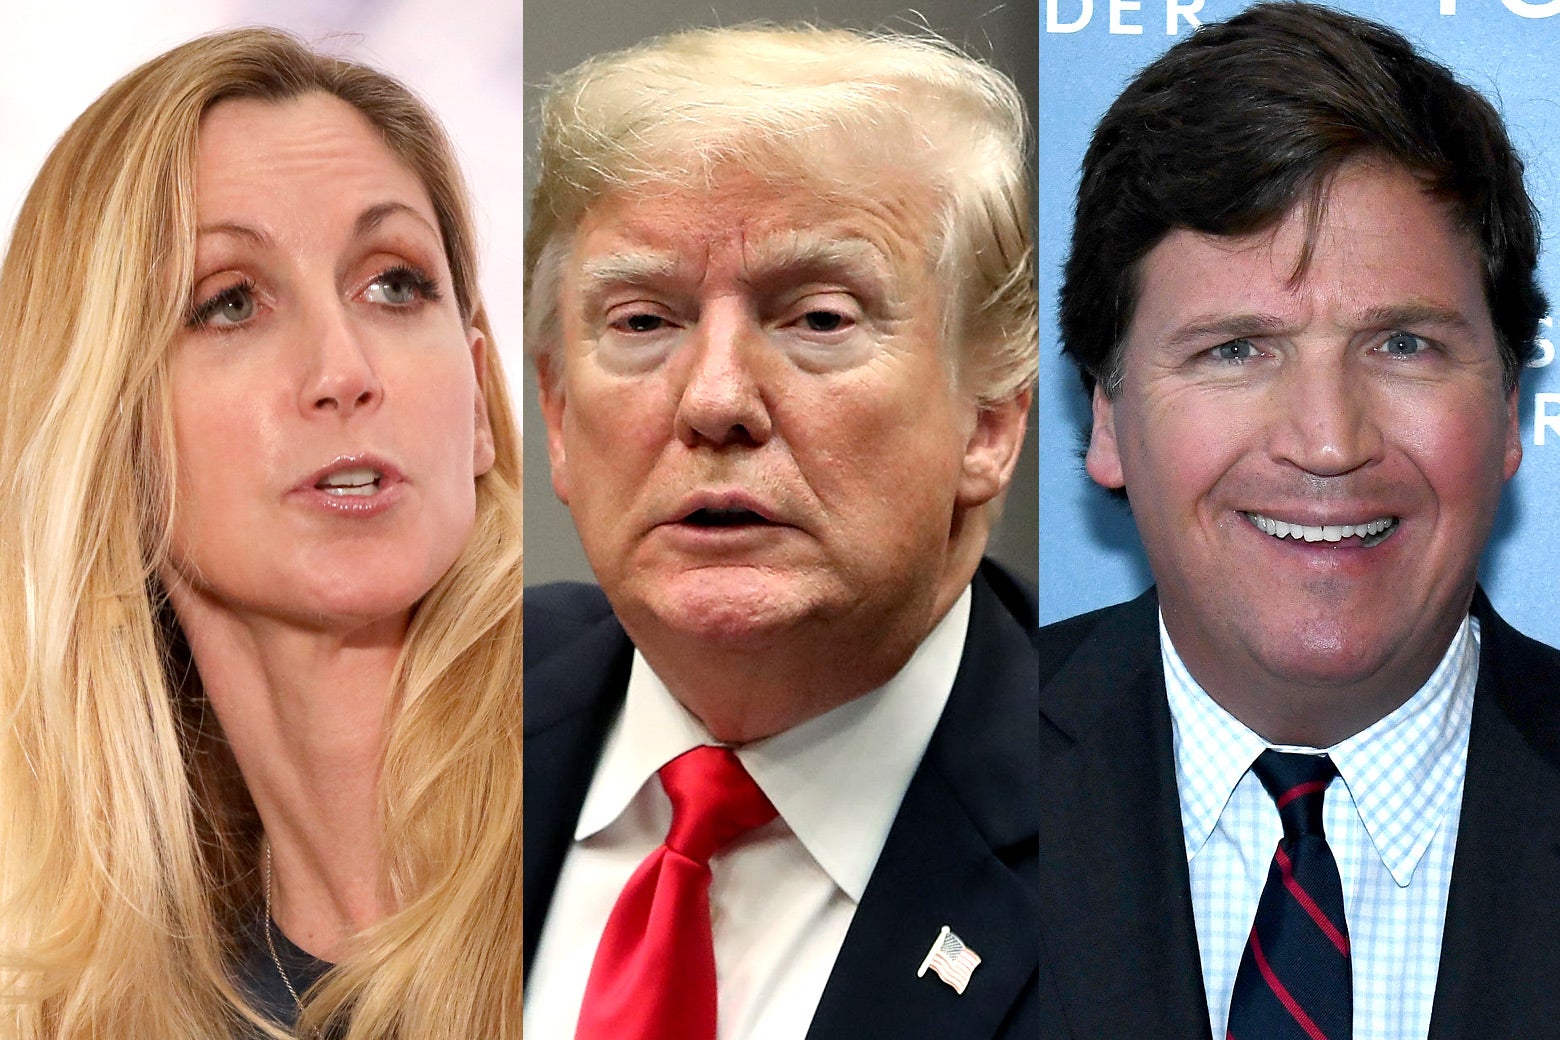 Ann Coulter, Donald Trump, and Tucker Carlson.